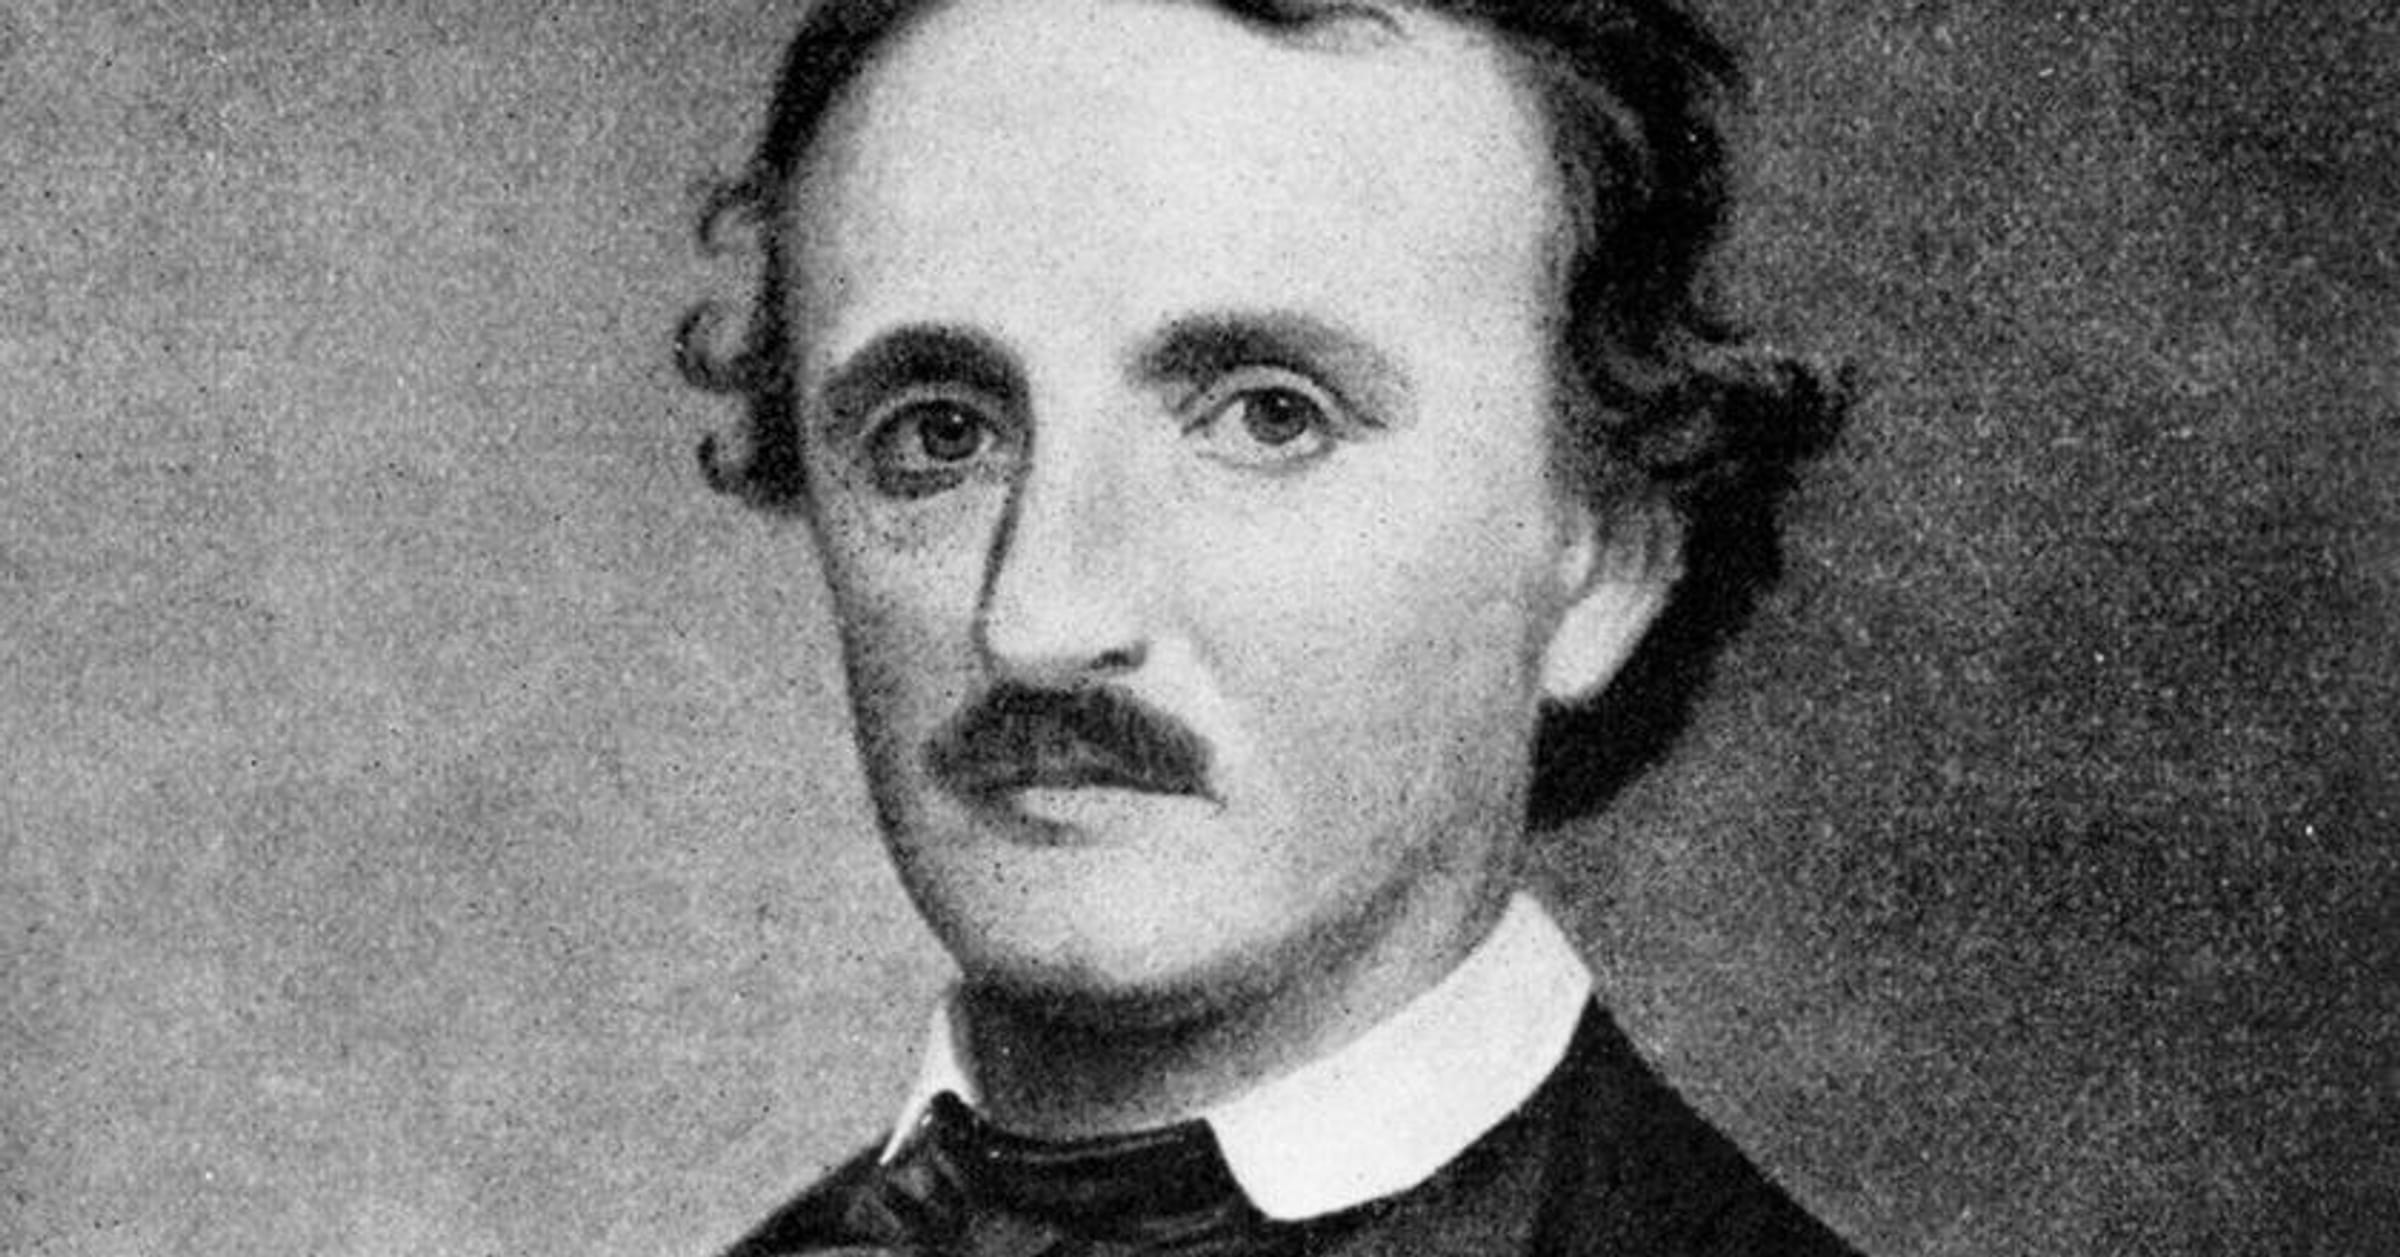 Humanities West Presents Edgar Allan Poe: Myths, Mysteries and